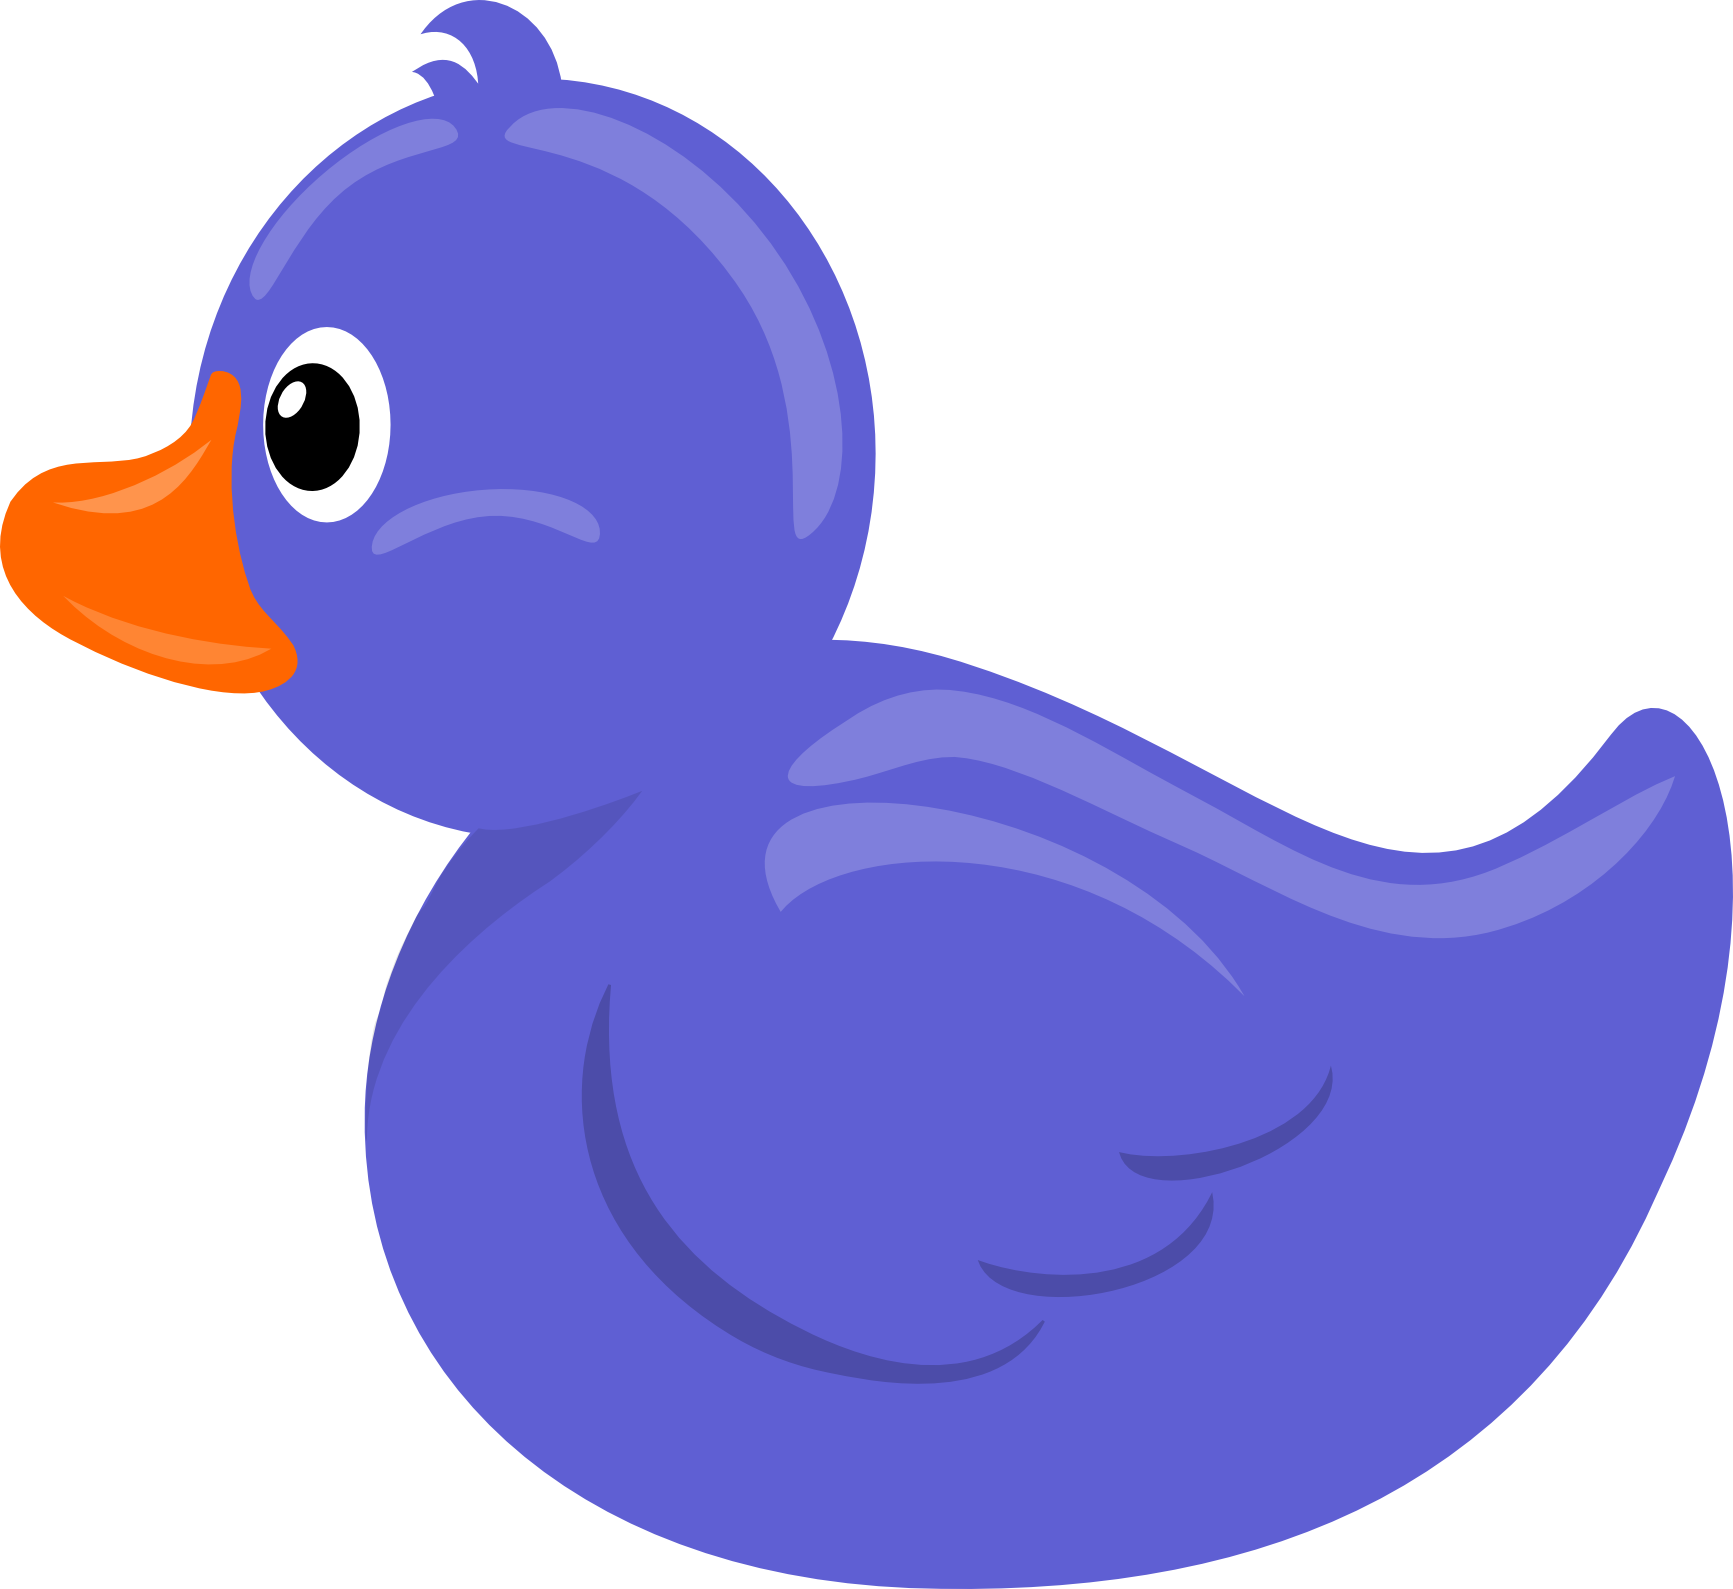 Flying duck clipart free clipart images image 2